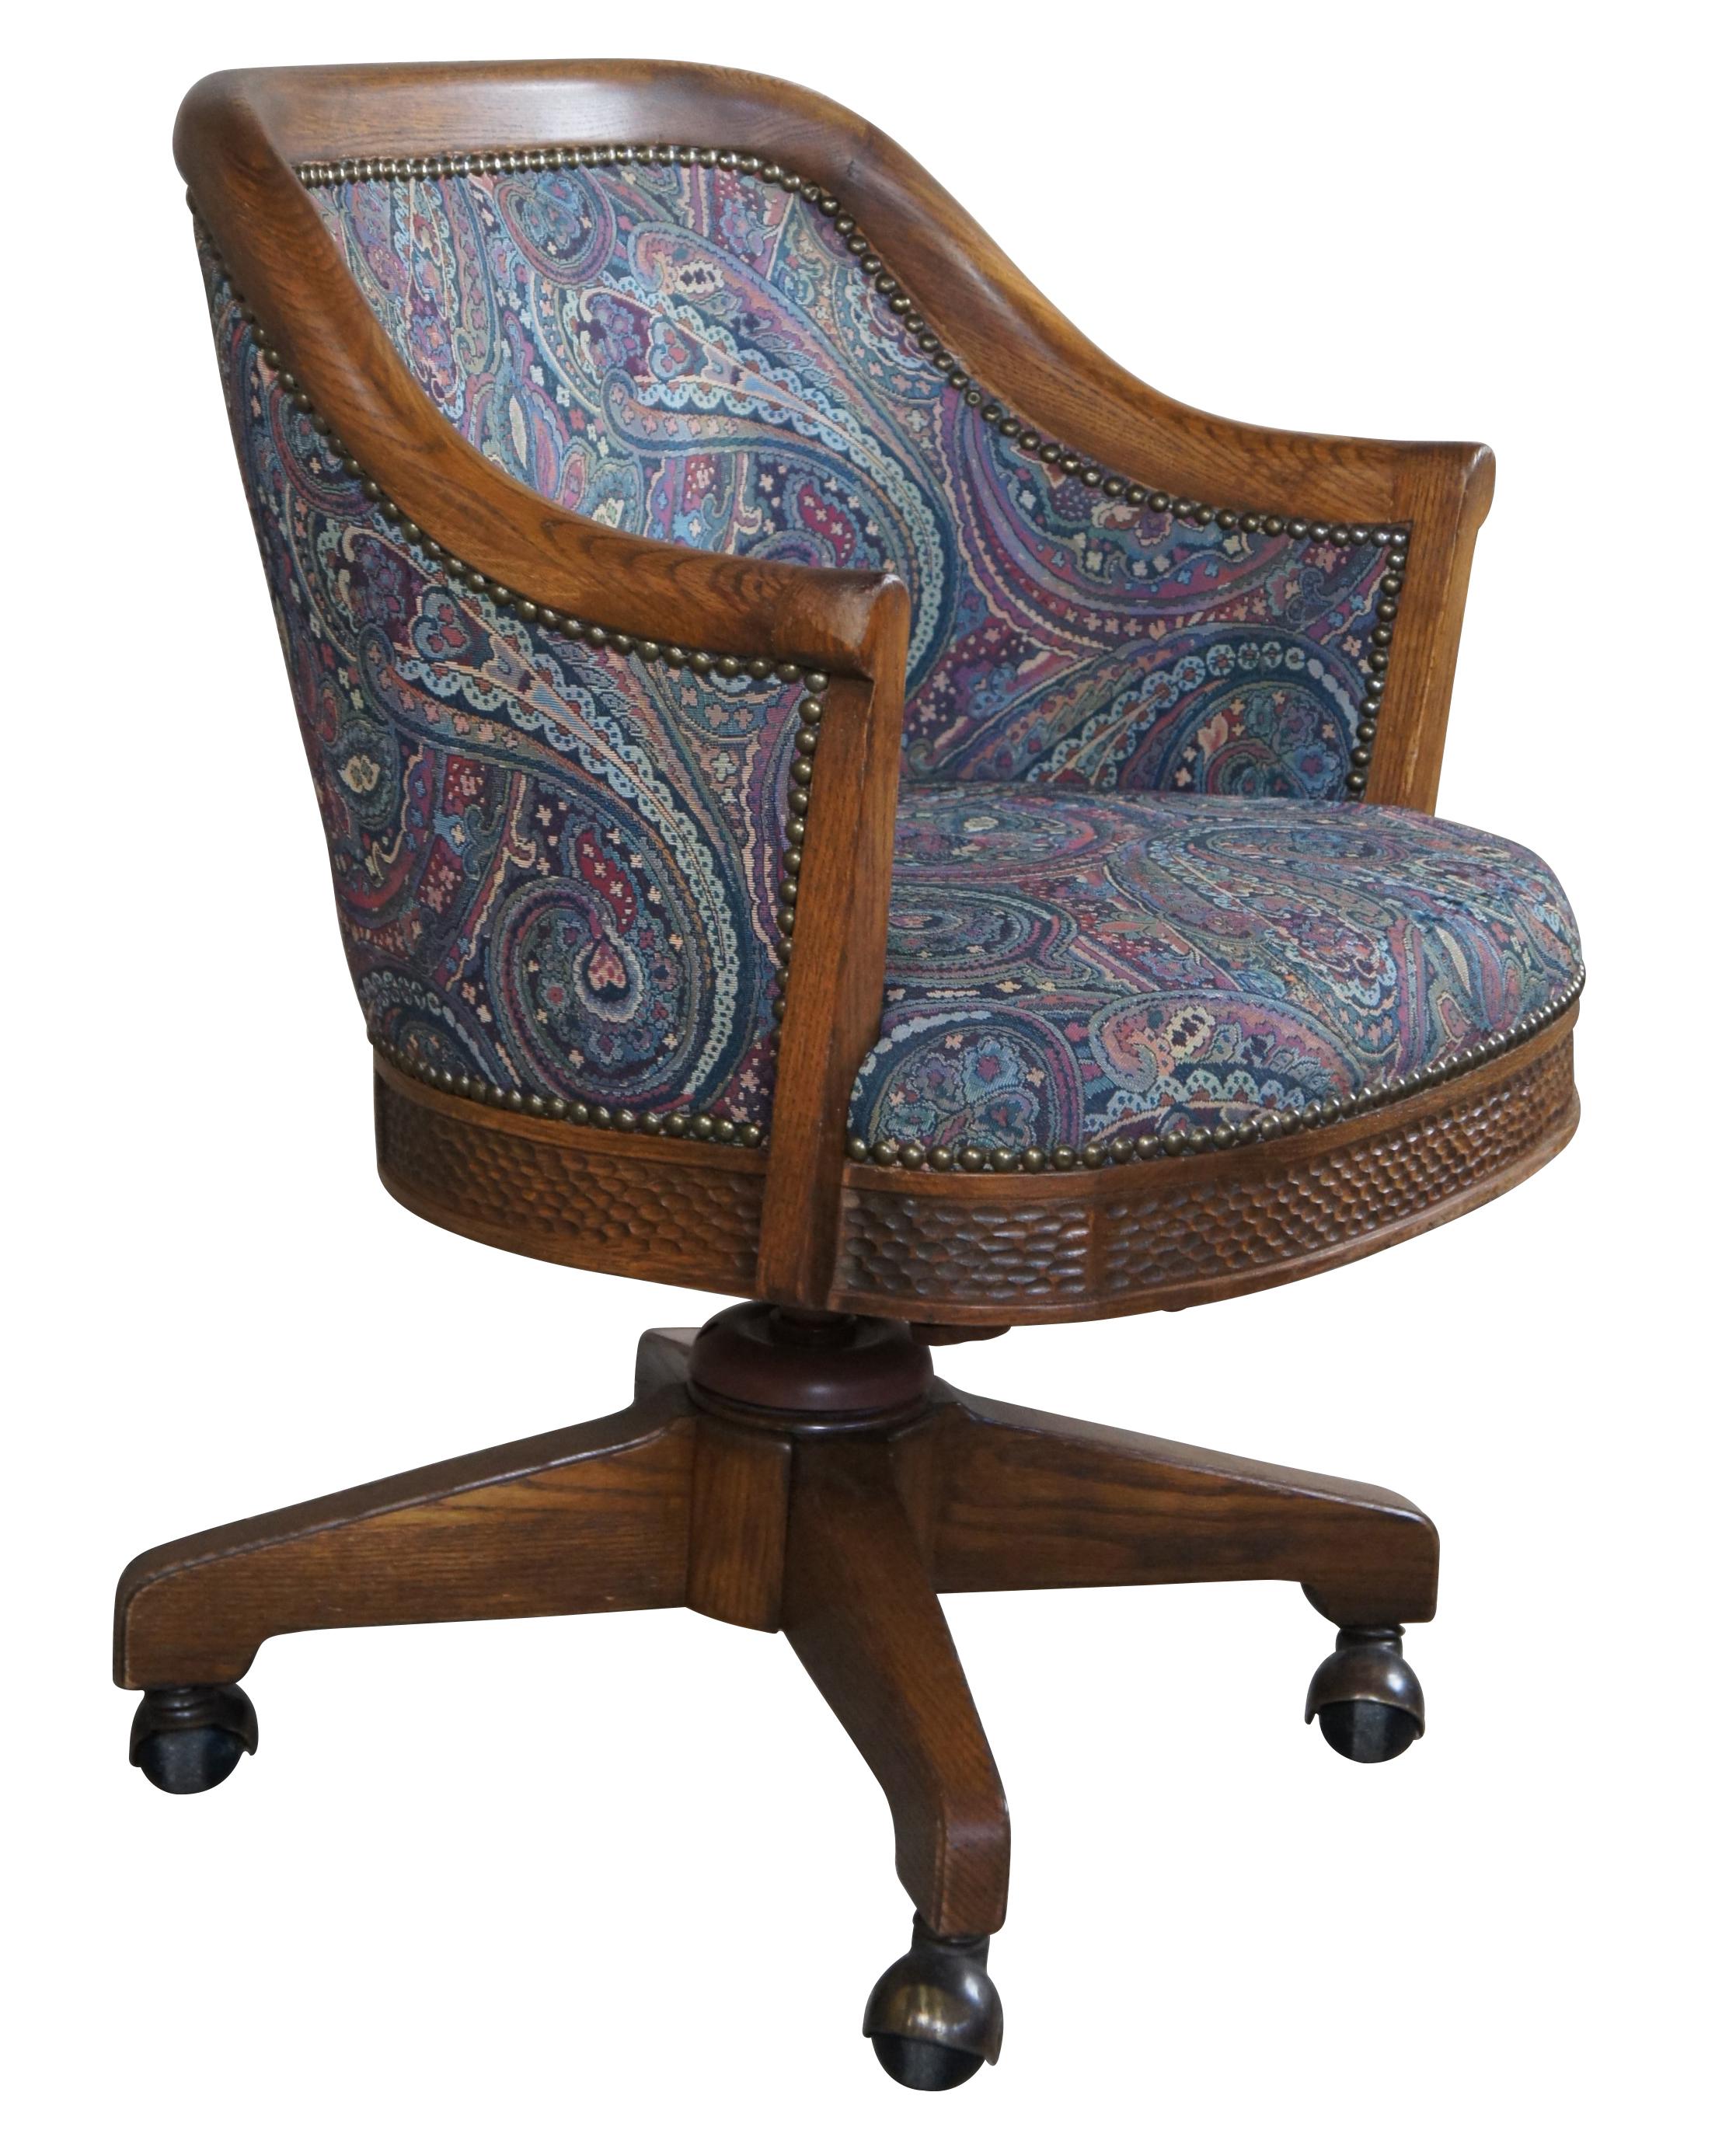 Romweber (R-18290) Viking Oak Swivel Desk Chair, circa 1980s. Features a barrel back design with flared arms, pasiley upholstery, brass nailhead trim, and a swivel base. The lower apron is neatly carved in a Nordic manner. An iconic piece from the